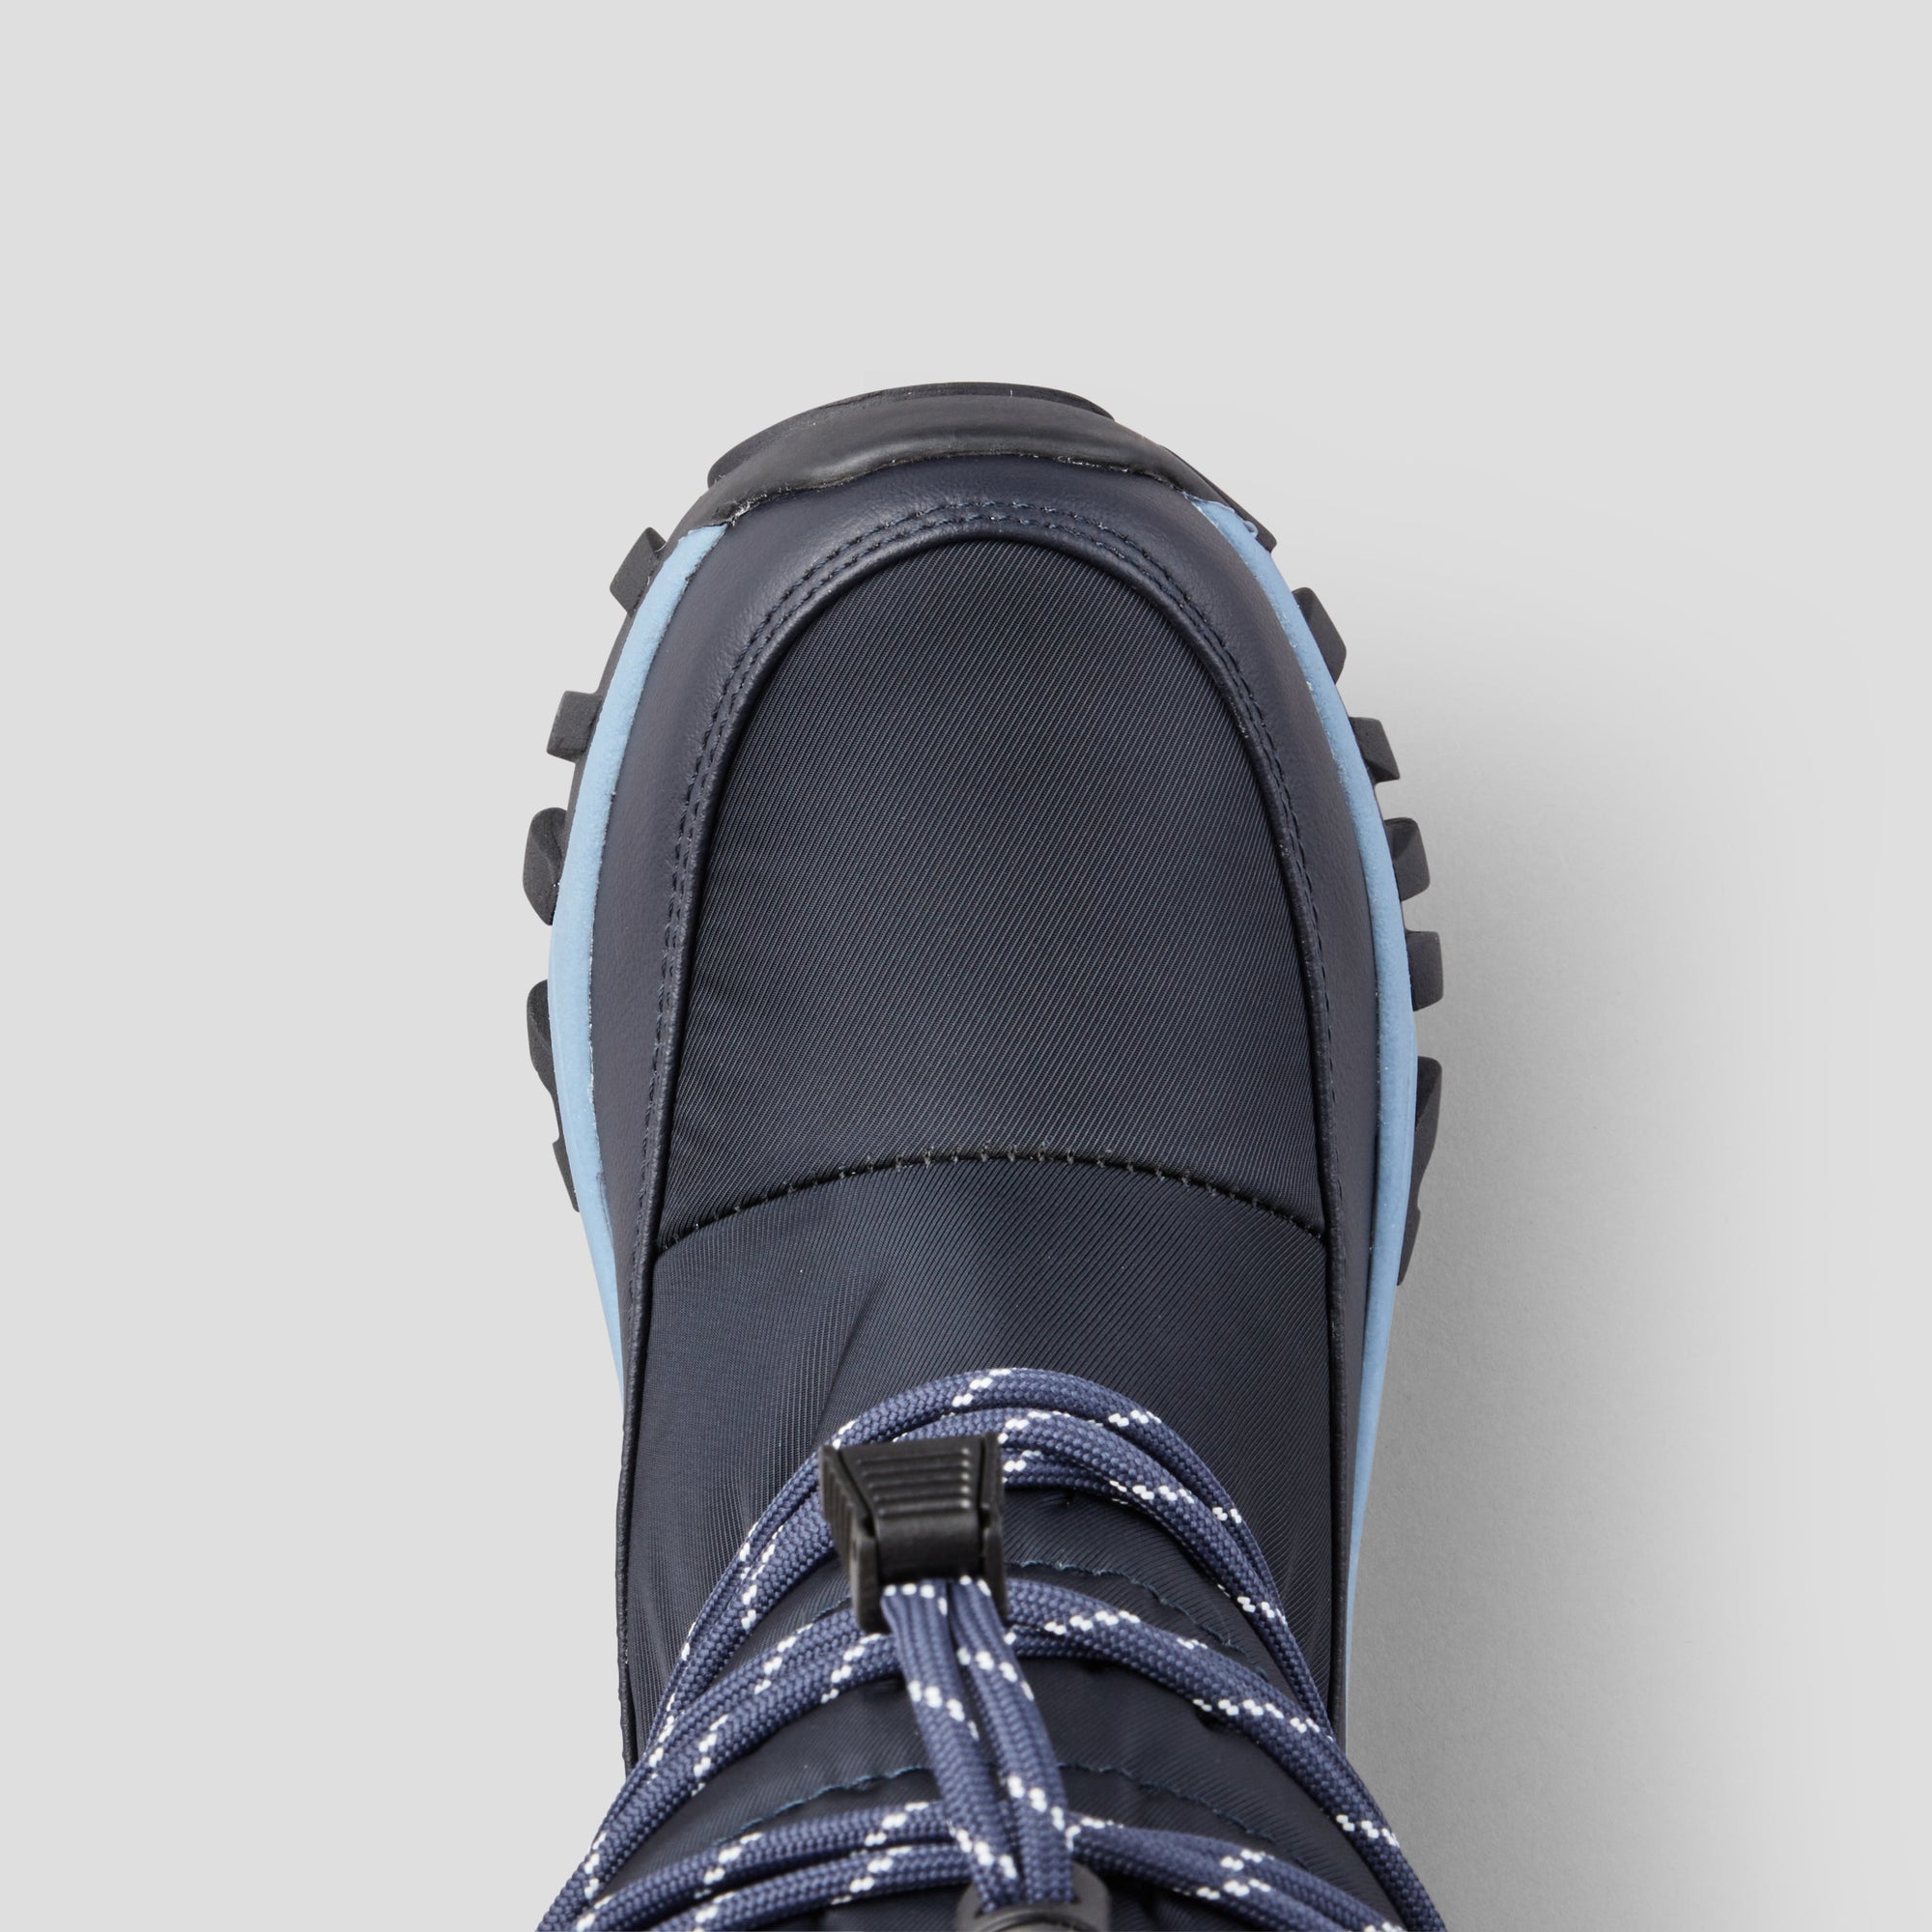 Thrill Nylon Waterproof Winter Boot (Youth+) - Colour Navy